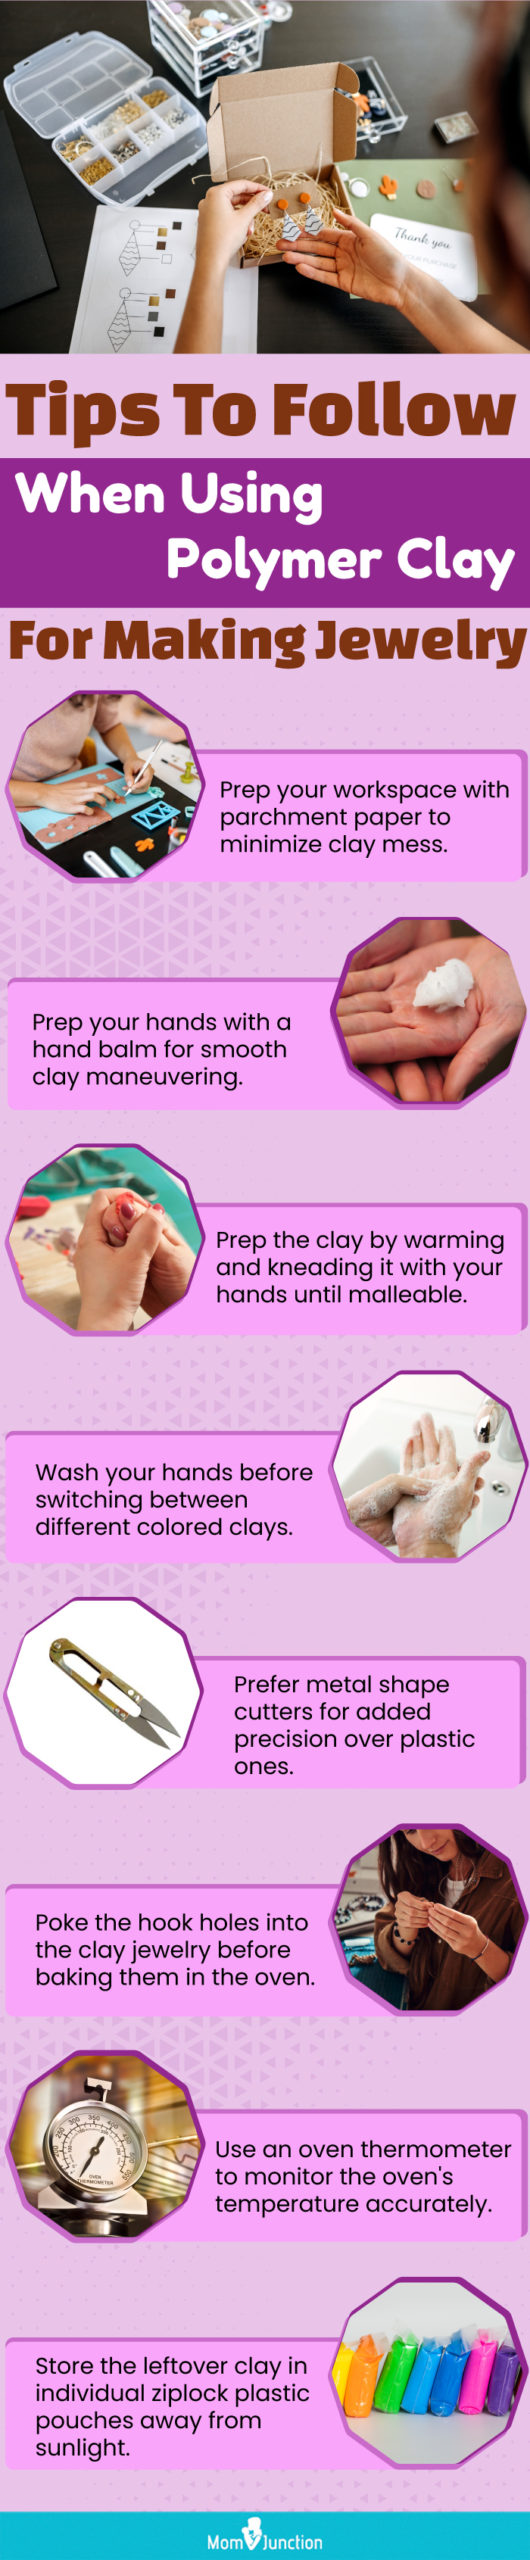 Tips To Follow When Using Polymer Clay For Making Jewelry (infographic)